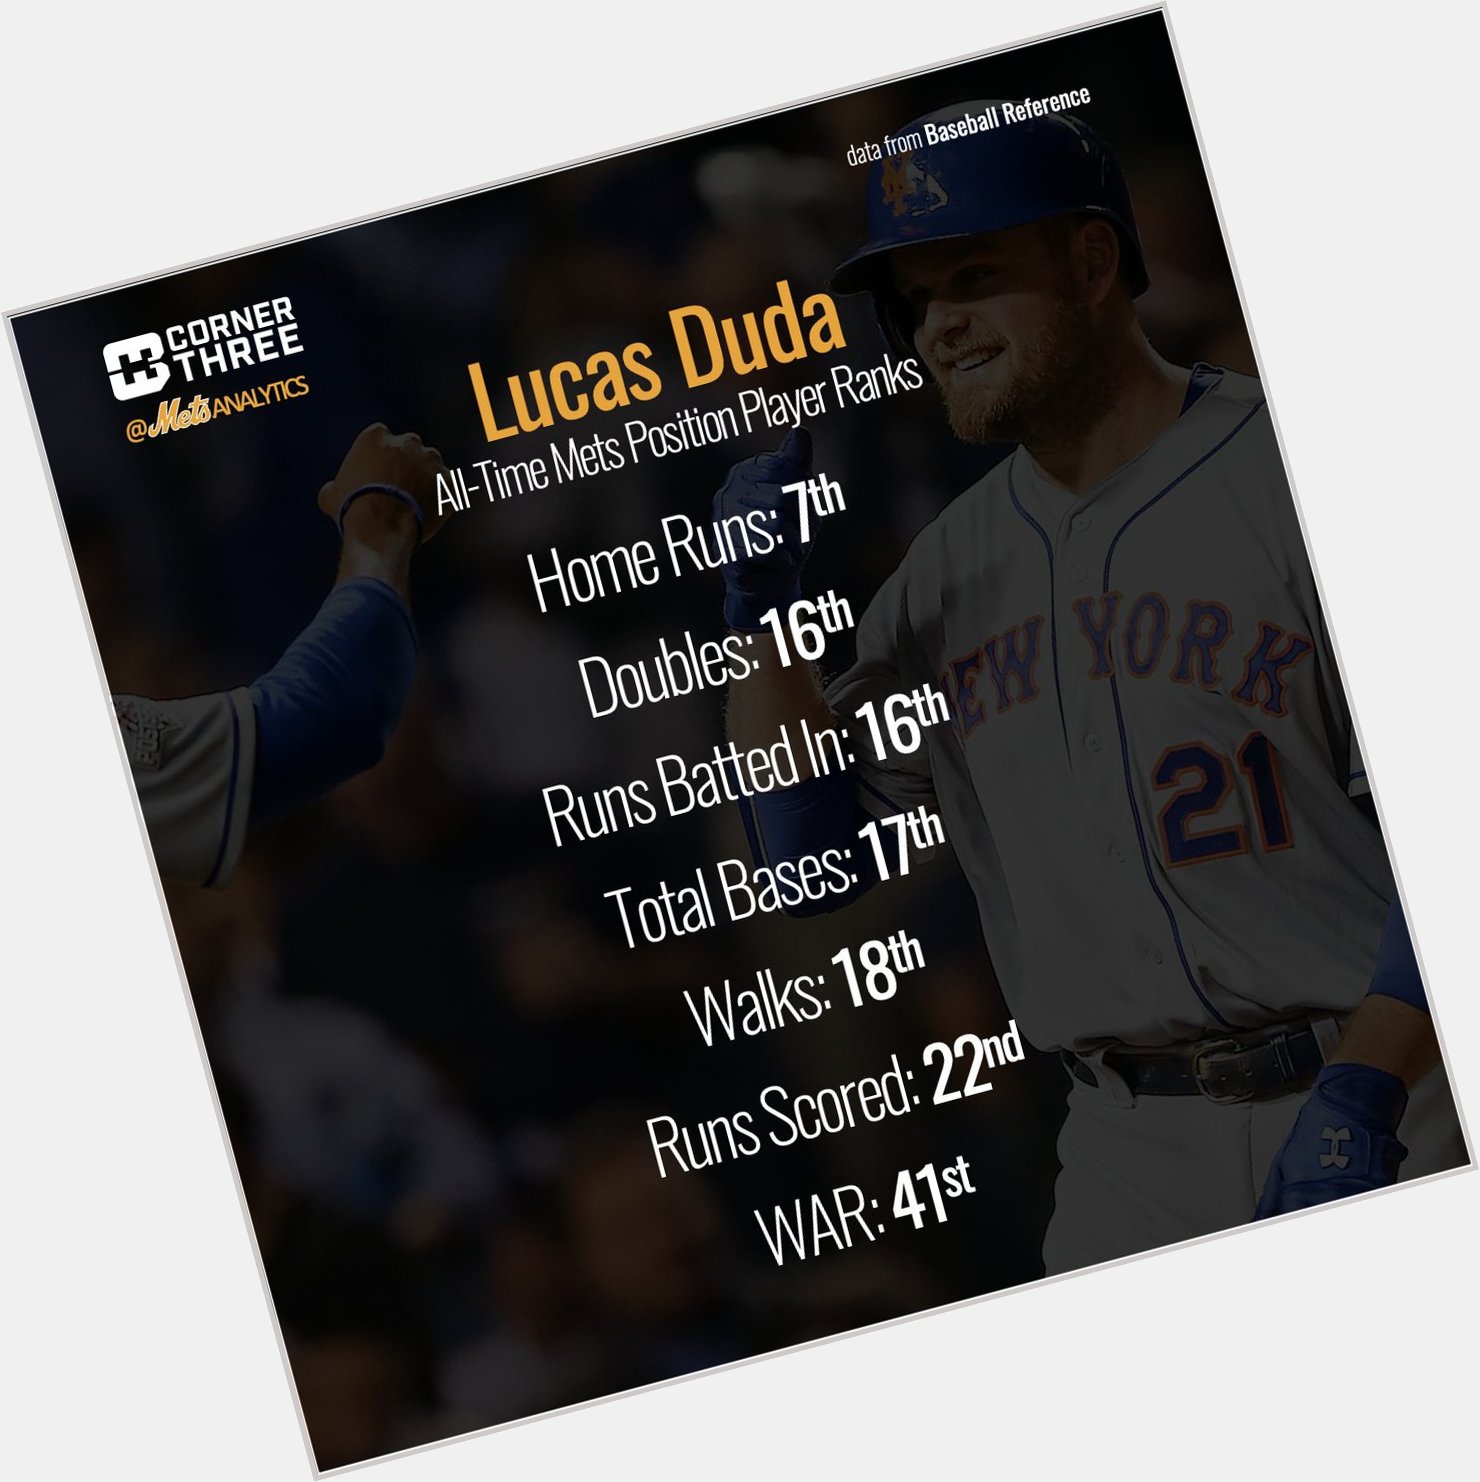 We Follow Lucas Duda!

Happy birthday to an All-Time Met!  